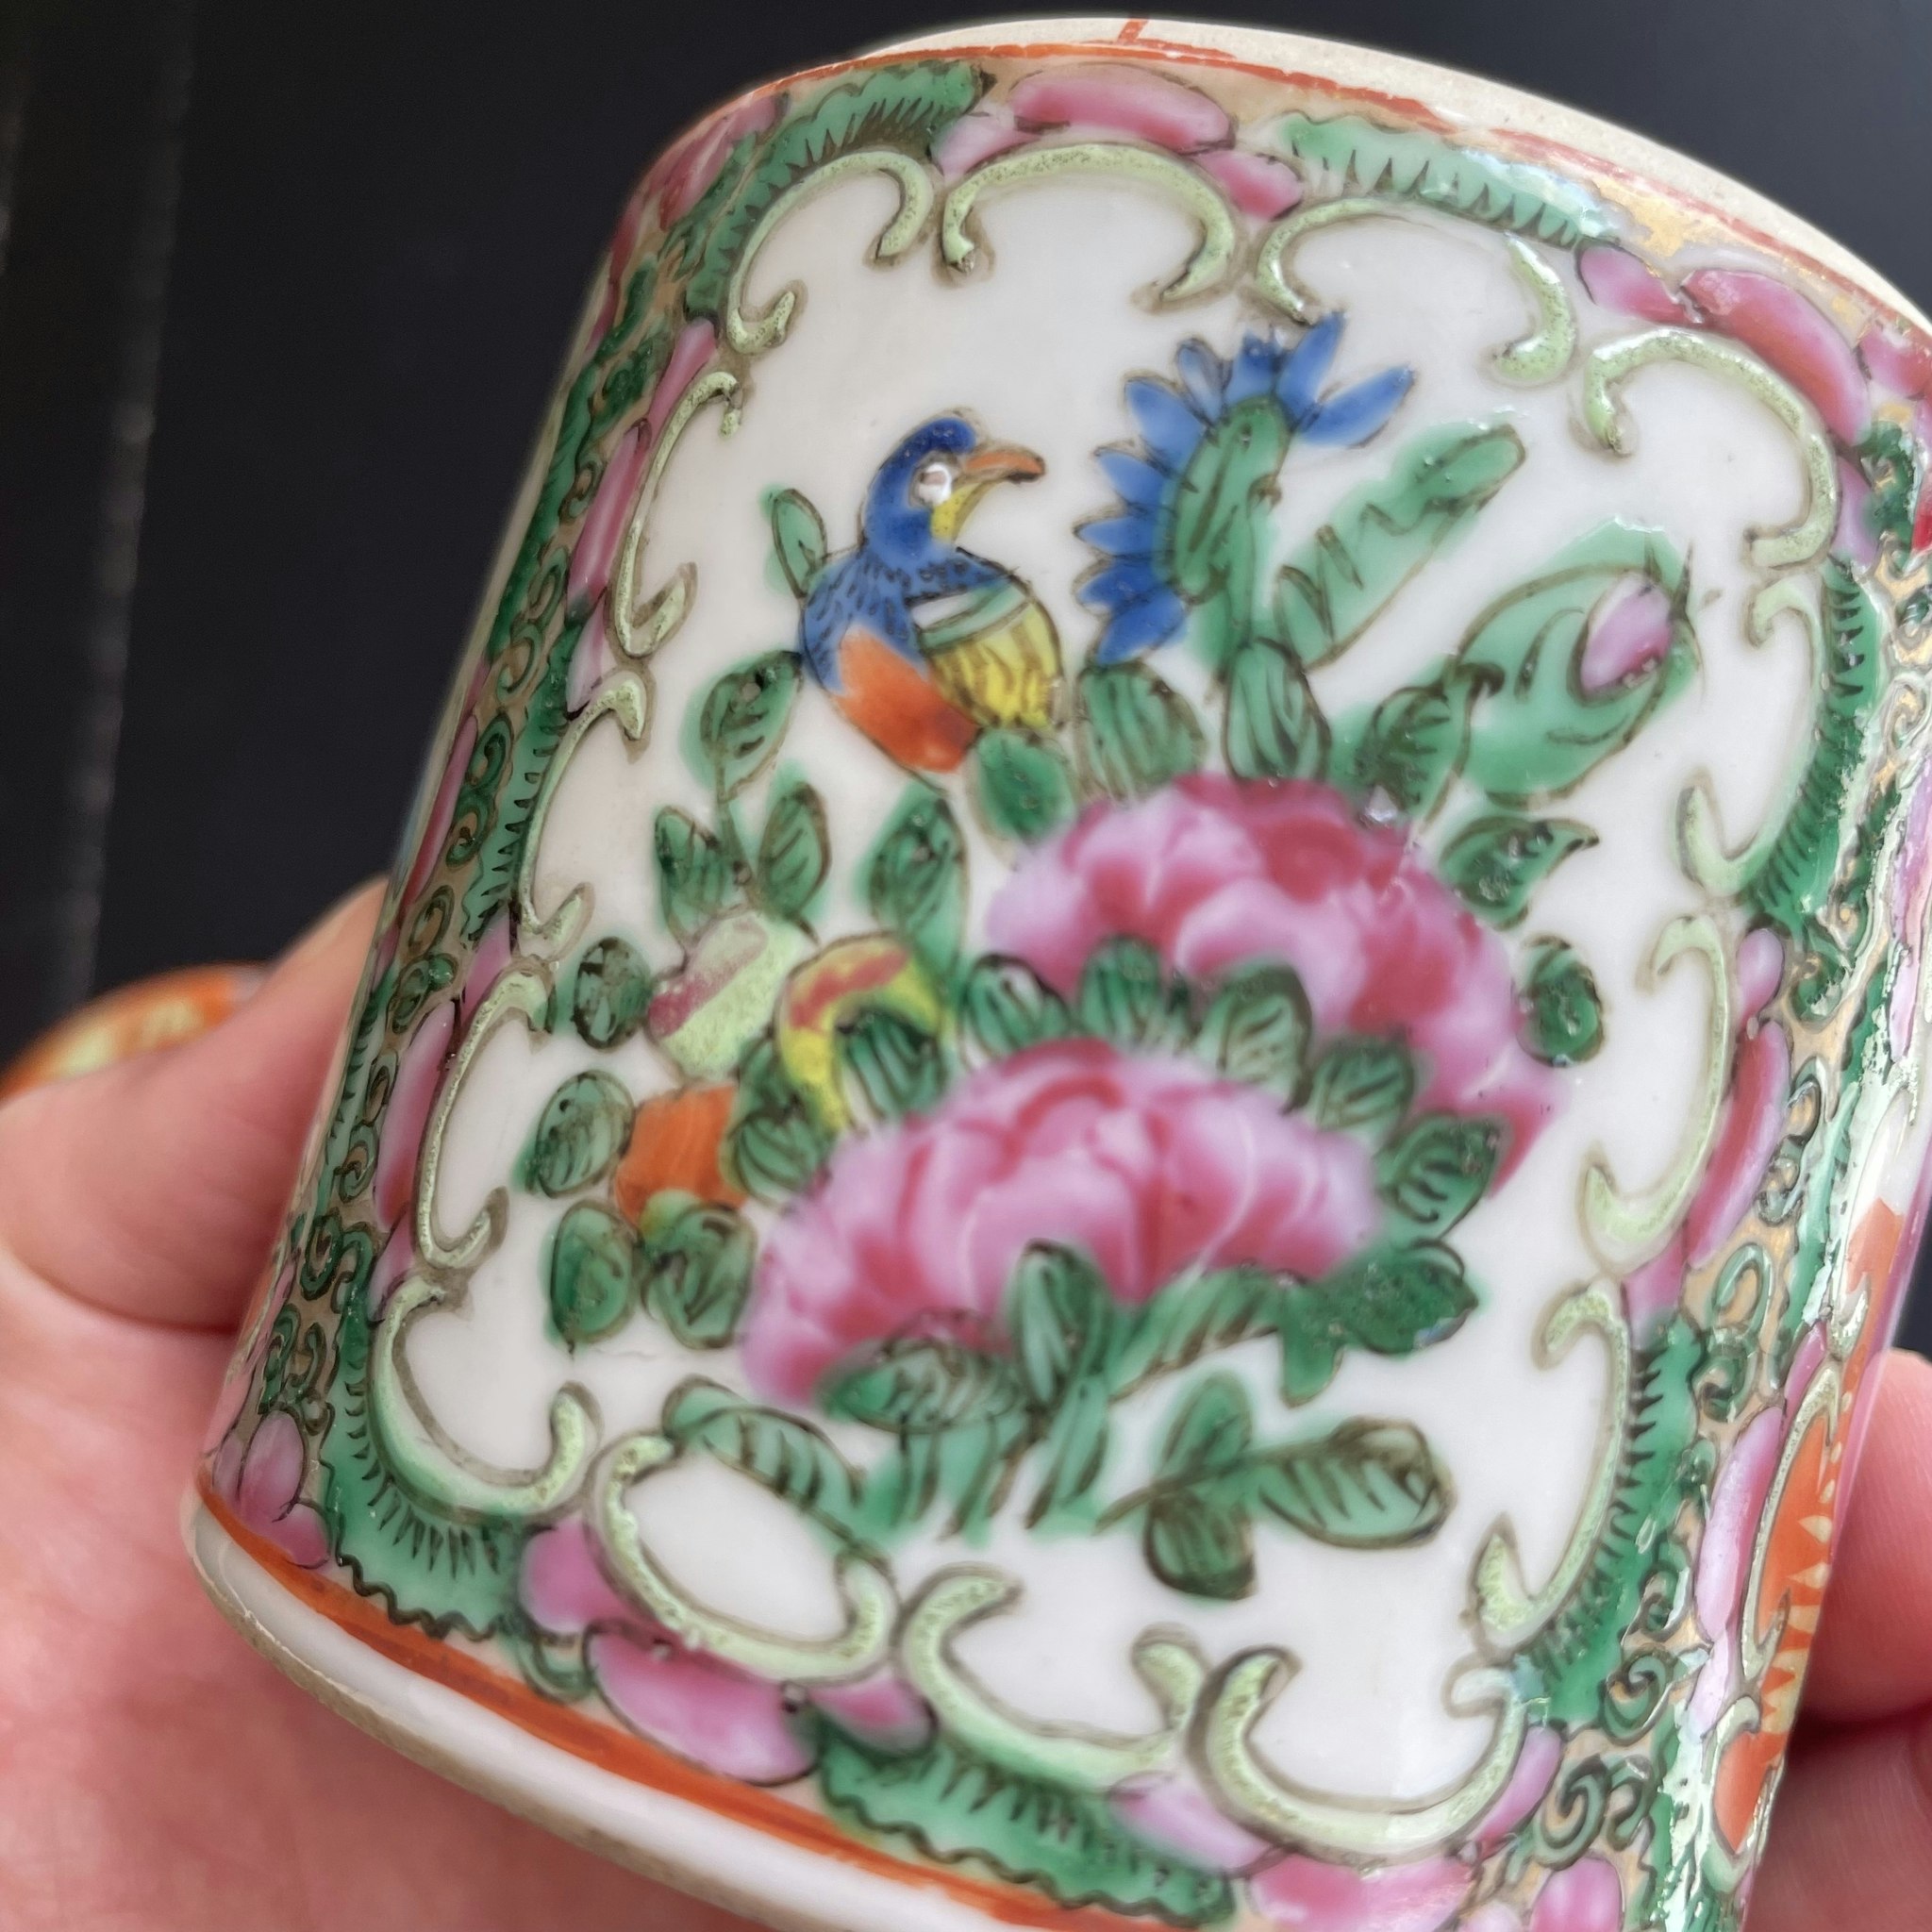 Chinese Antique Rose Medallion Lidded Porcelain Box, Late Qing Dynasty #1691